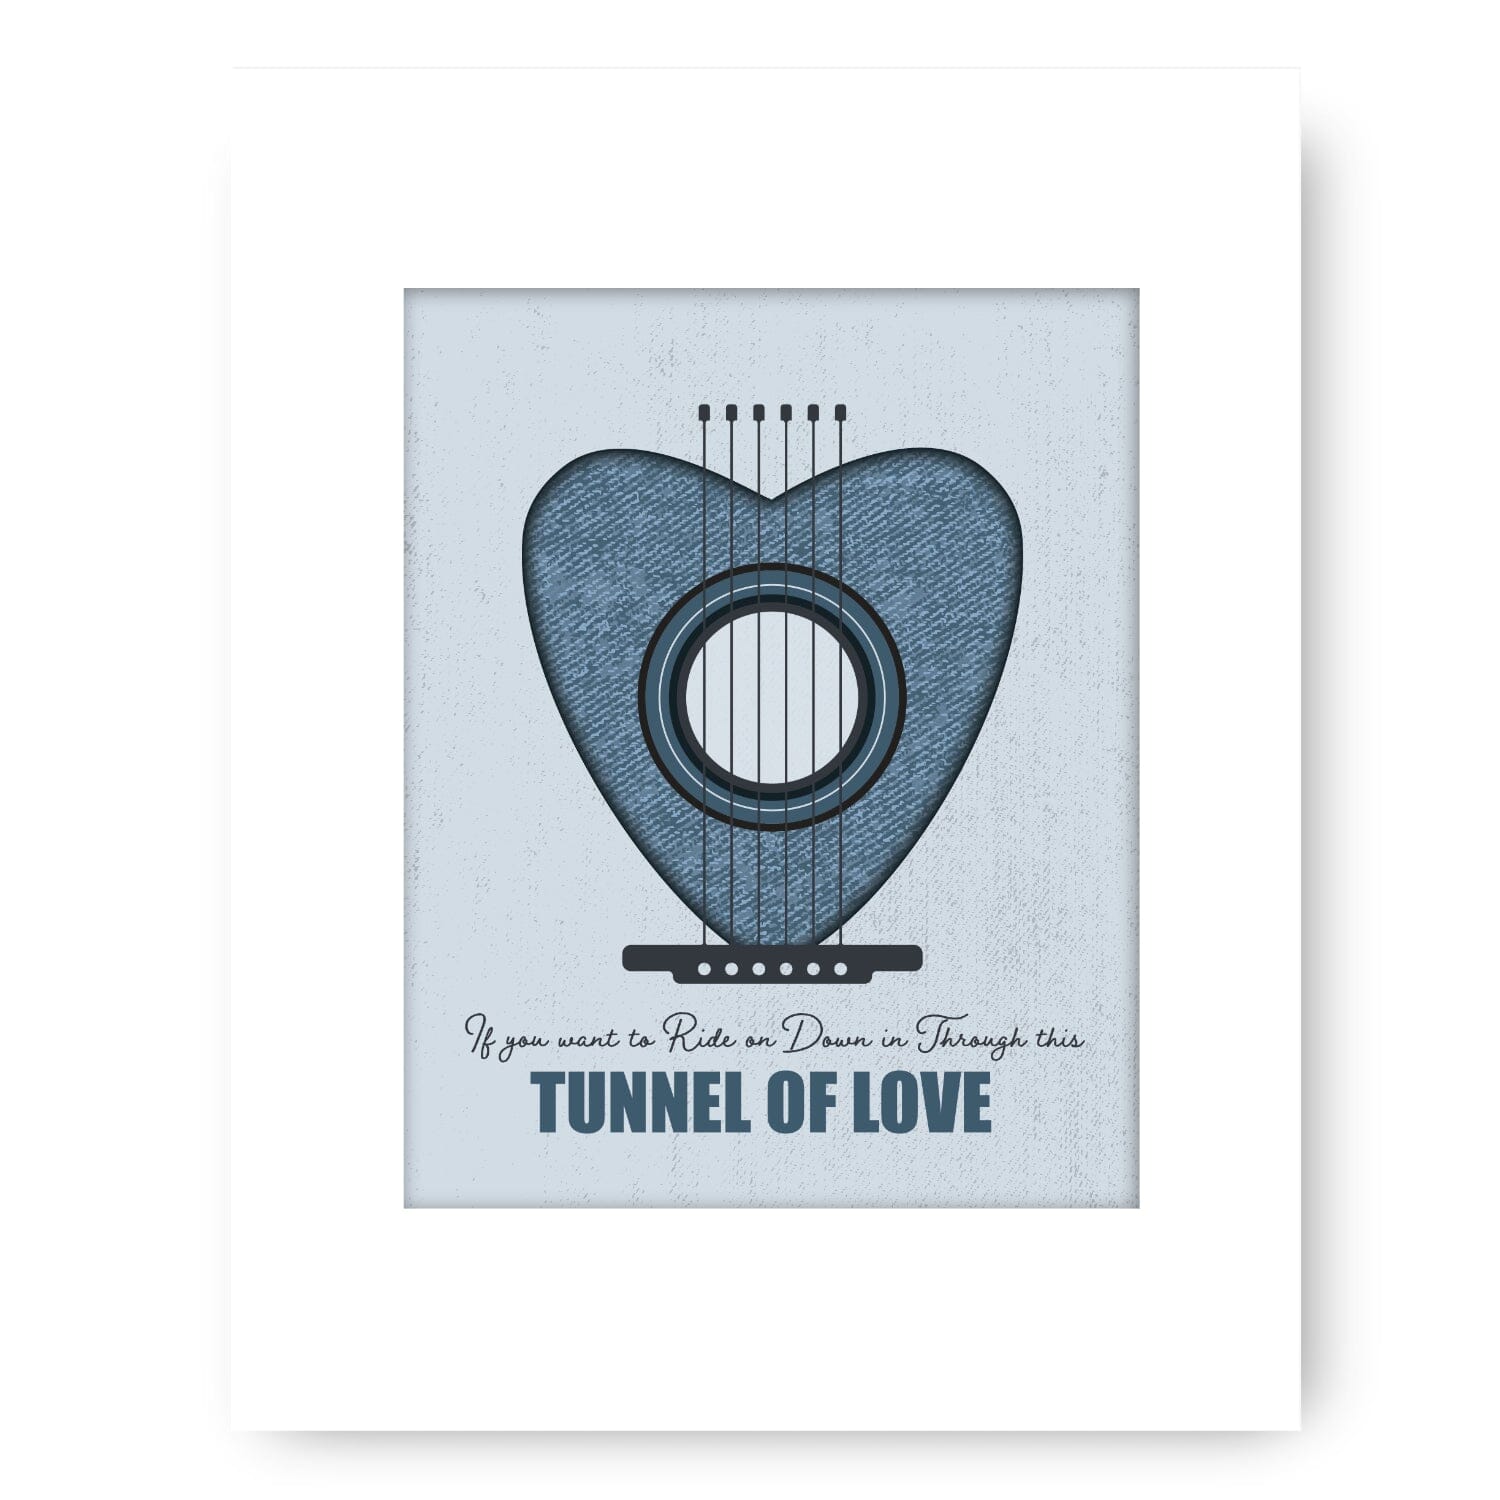 Tunnel of Love by Bruce Springsteen - Lyric Rock Music Art Song Lyrics Art Song Lyrics Art 11x14 White Matted Print 